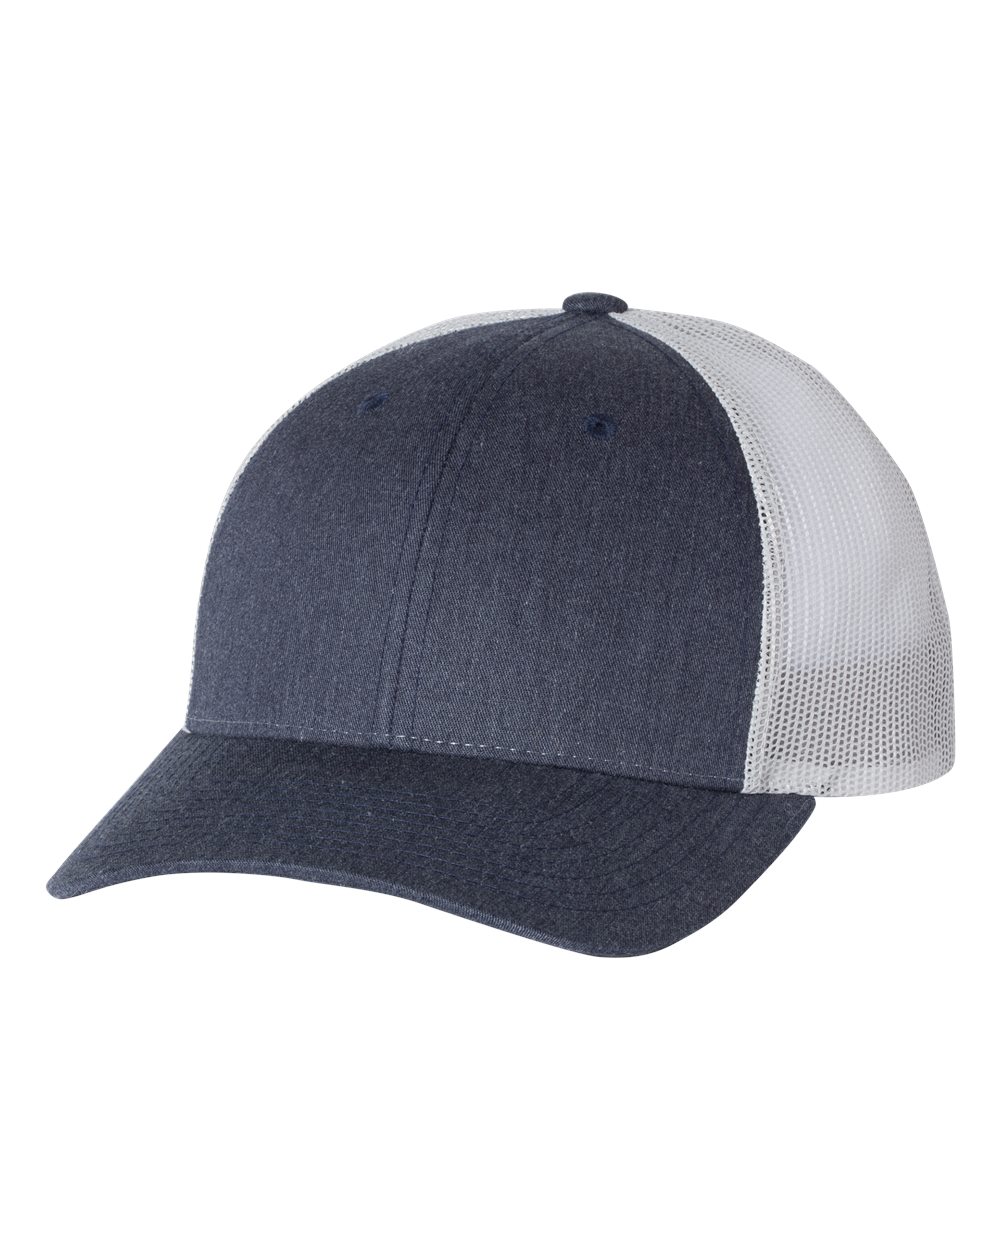 click to view Heather Navy/ Silver